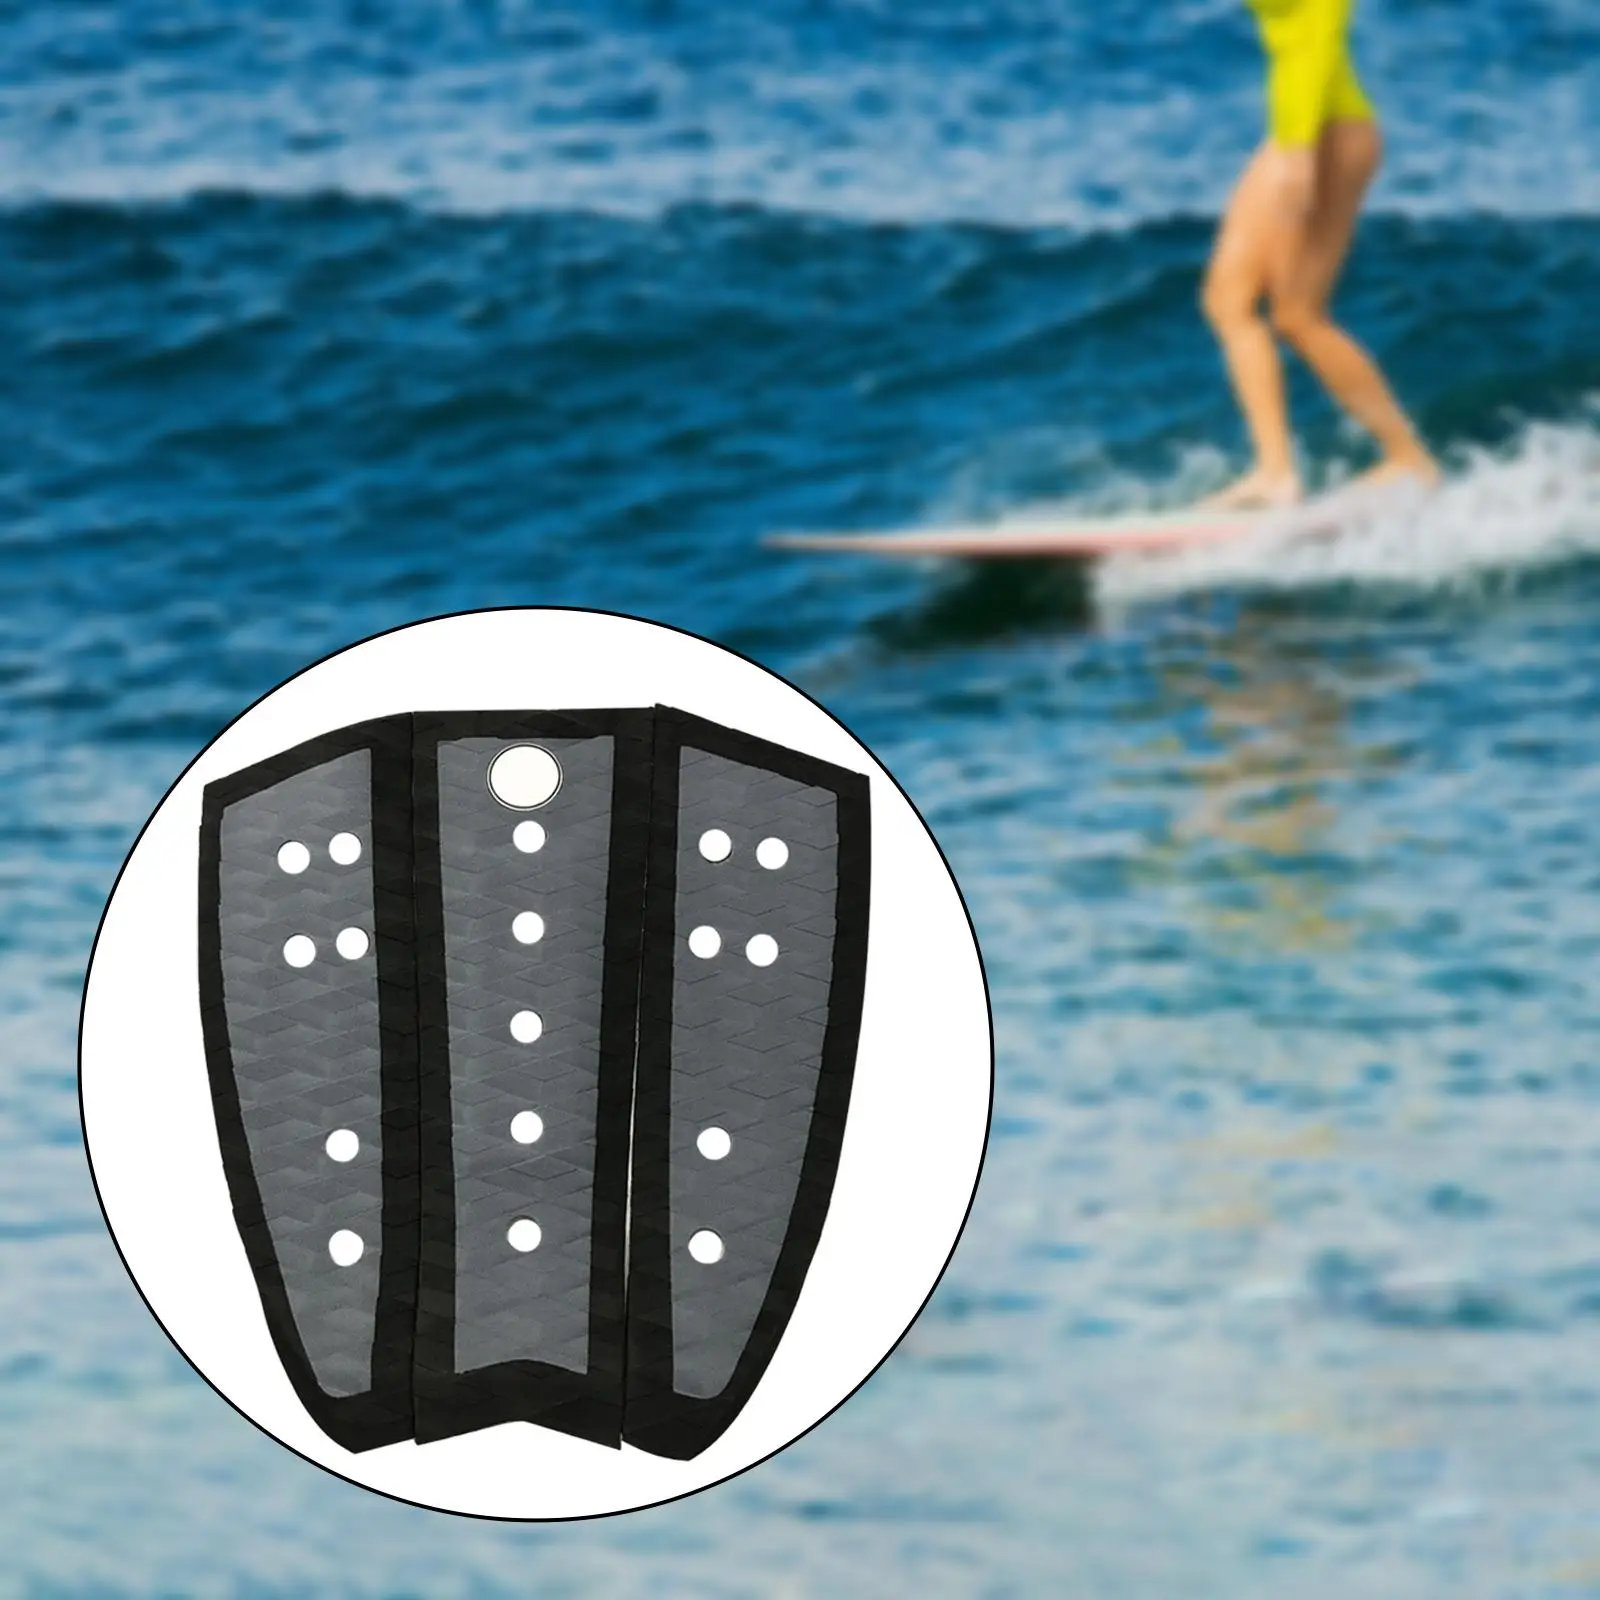 3x EVA Surfboard Traction Pad Surfing Padding Deck Pad Grip Professional Surf Traction Pad for Fish Board Longboard Funboard